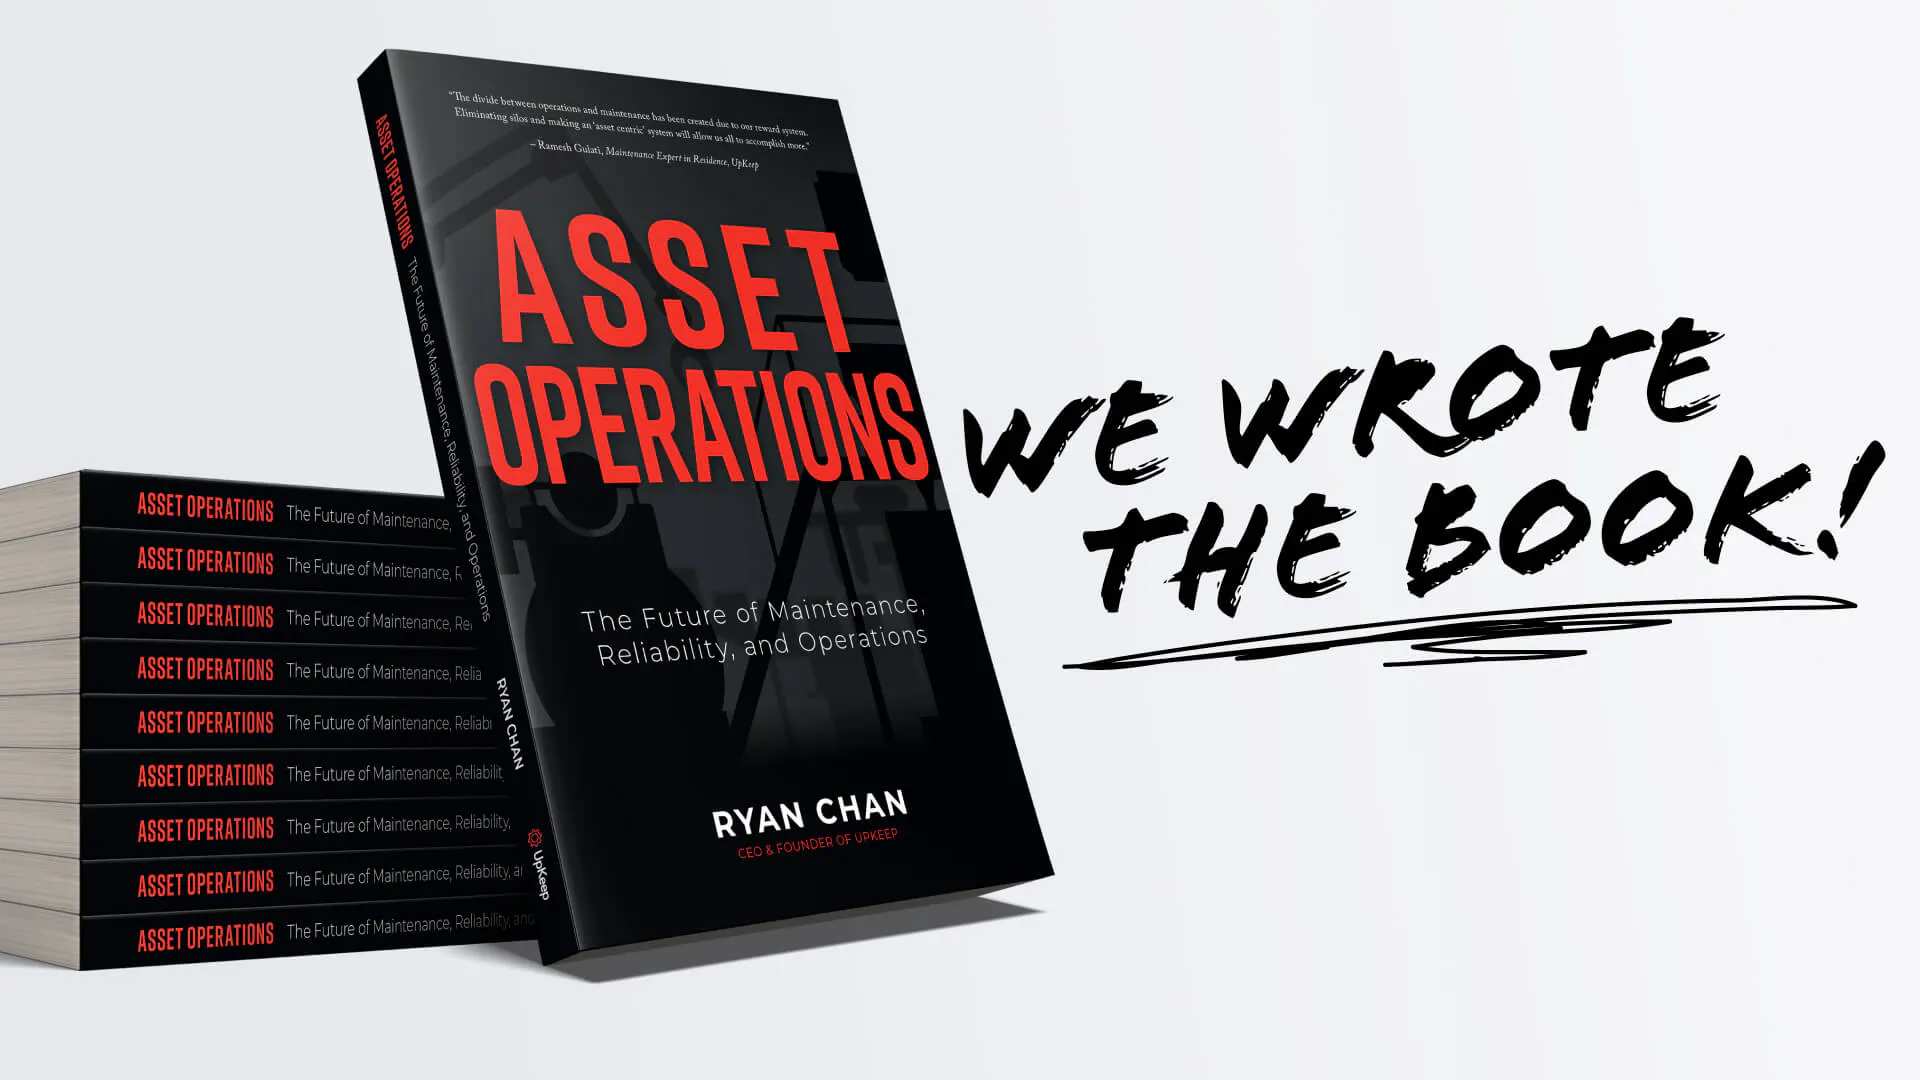 Asset Operations - We wrote the book!